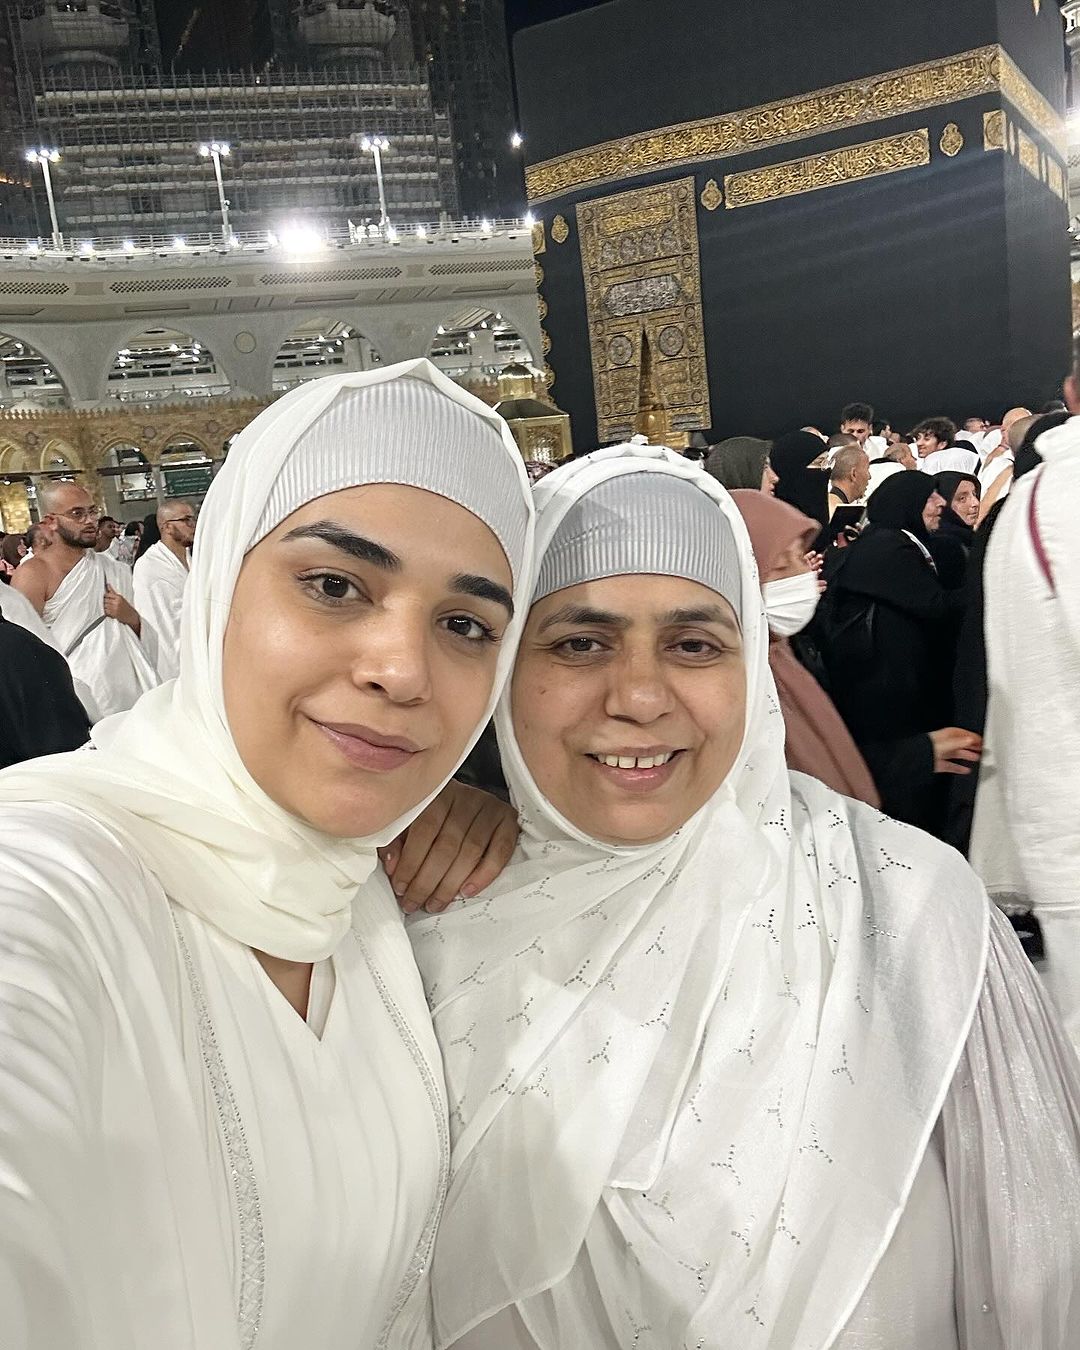 Kundali Bhagya Fame Anjum Fakih Is Excited To Perform Umrah With Her Mom At Mecca. She Expresses It’s A Moment Of Immense Joy And Appreciation!